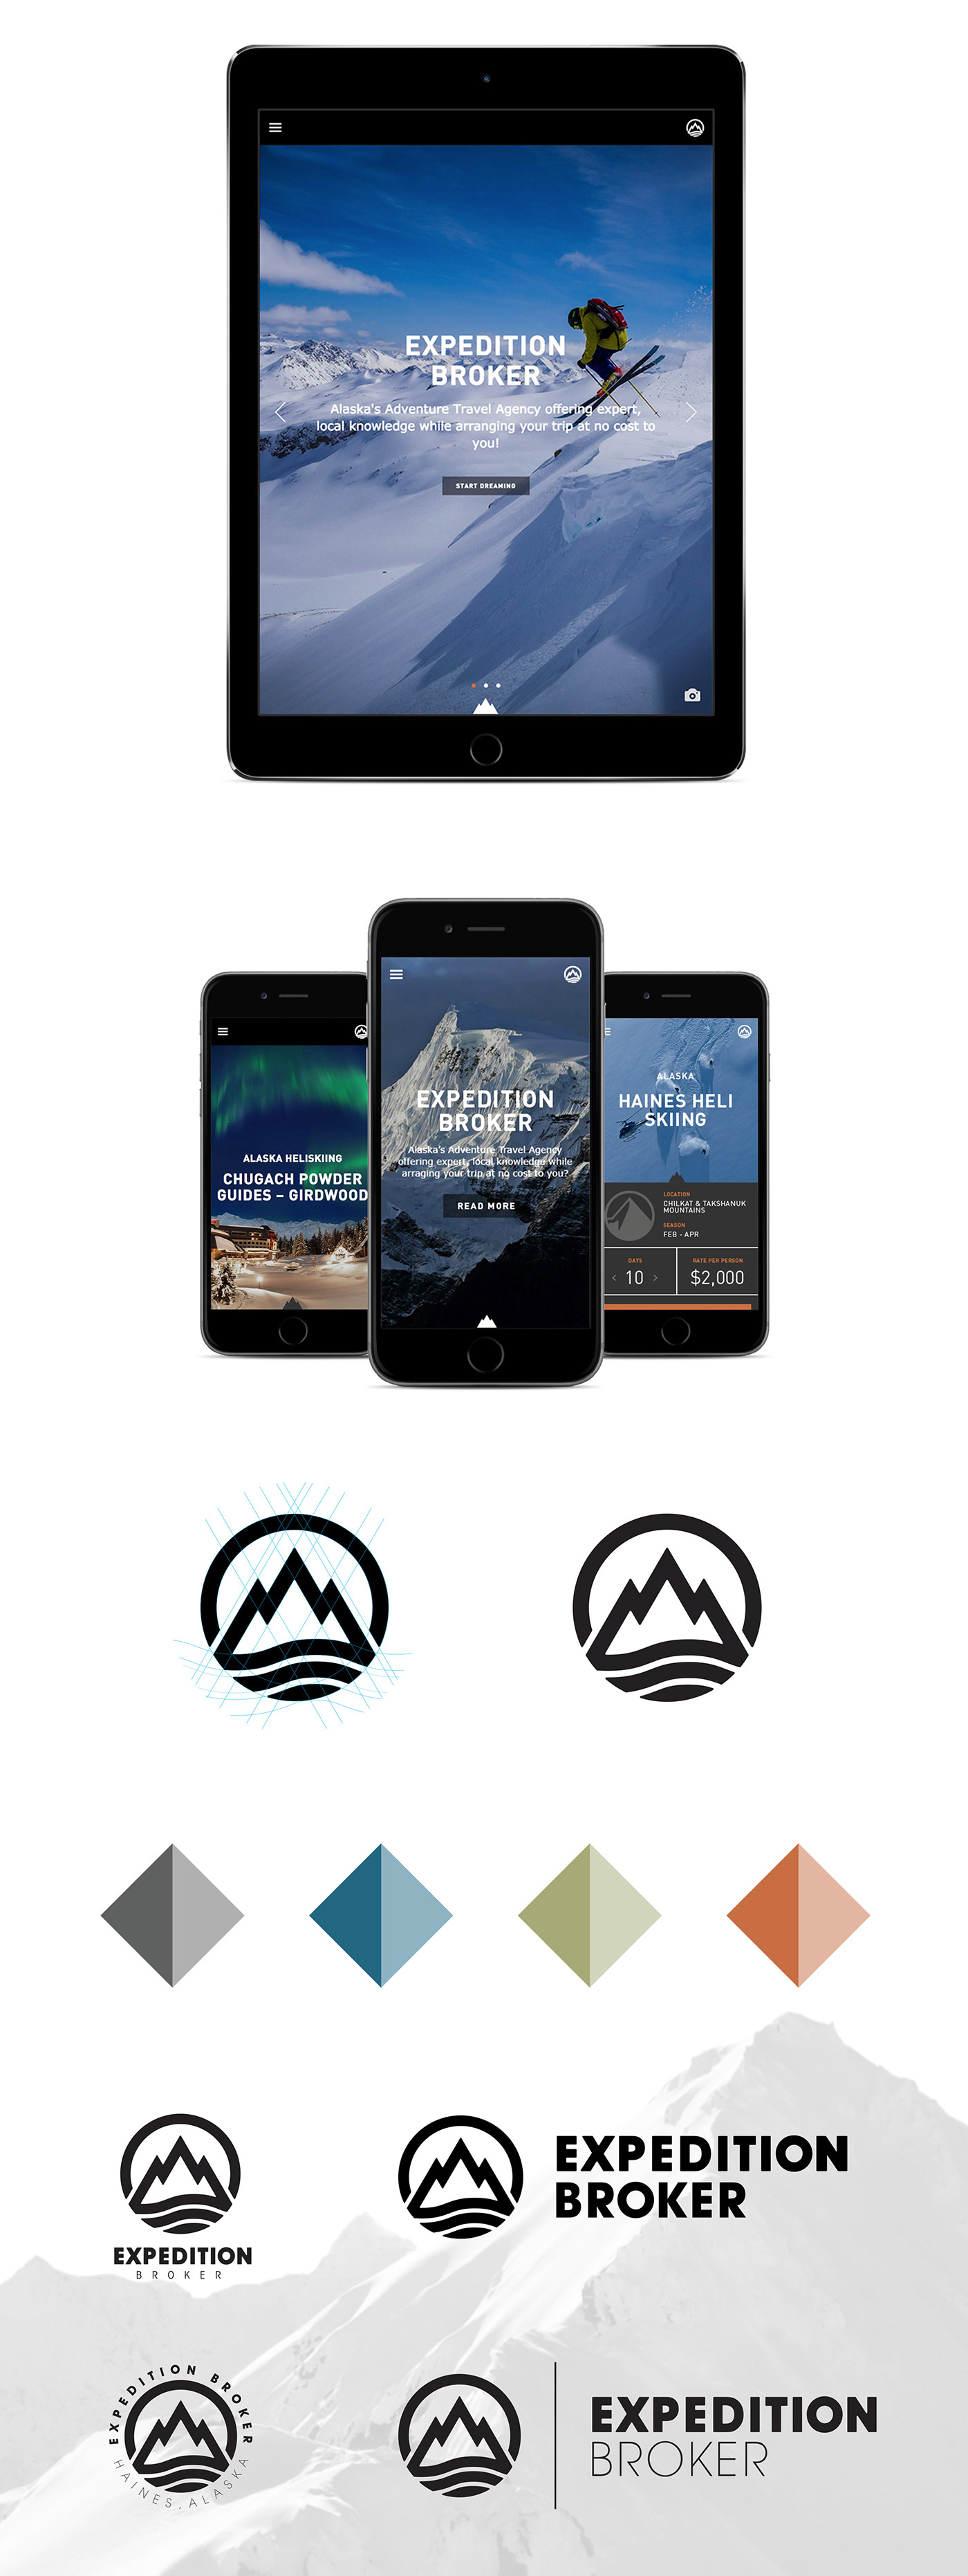 adventure outdoors action sports fishing skiing surfing expedition Website logo identity design Website Design camping Nature